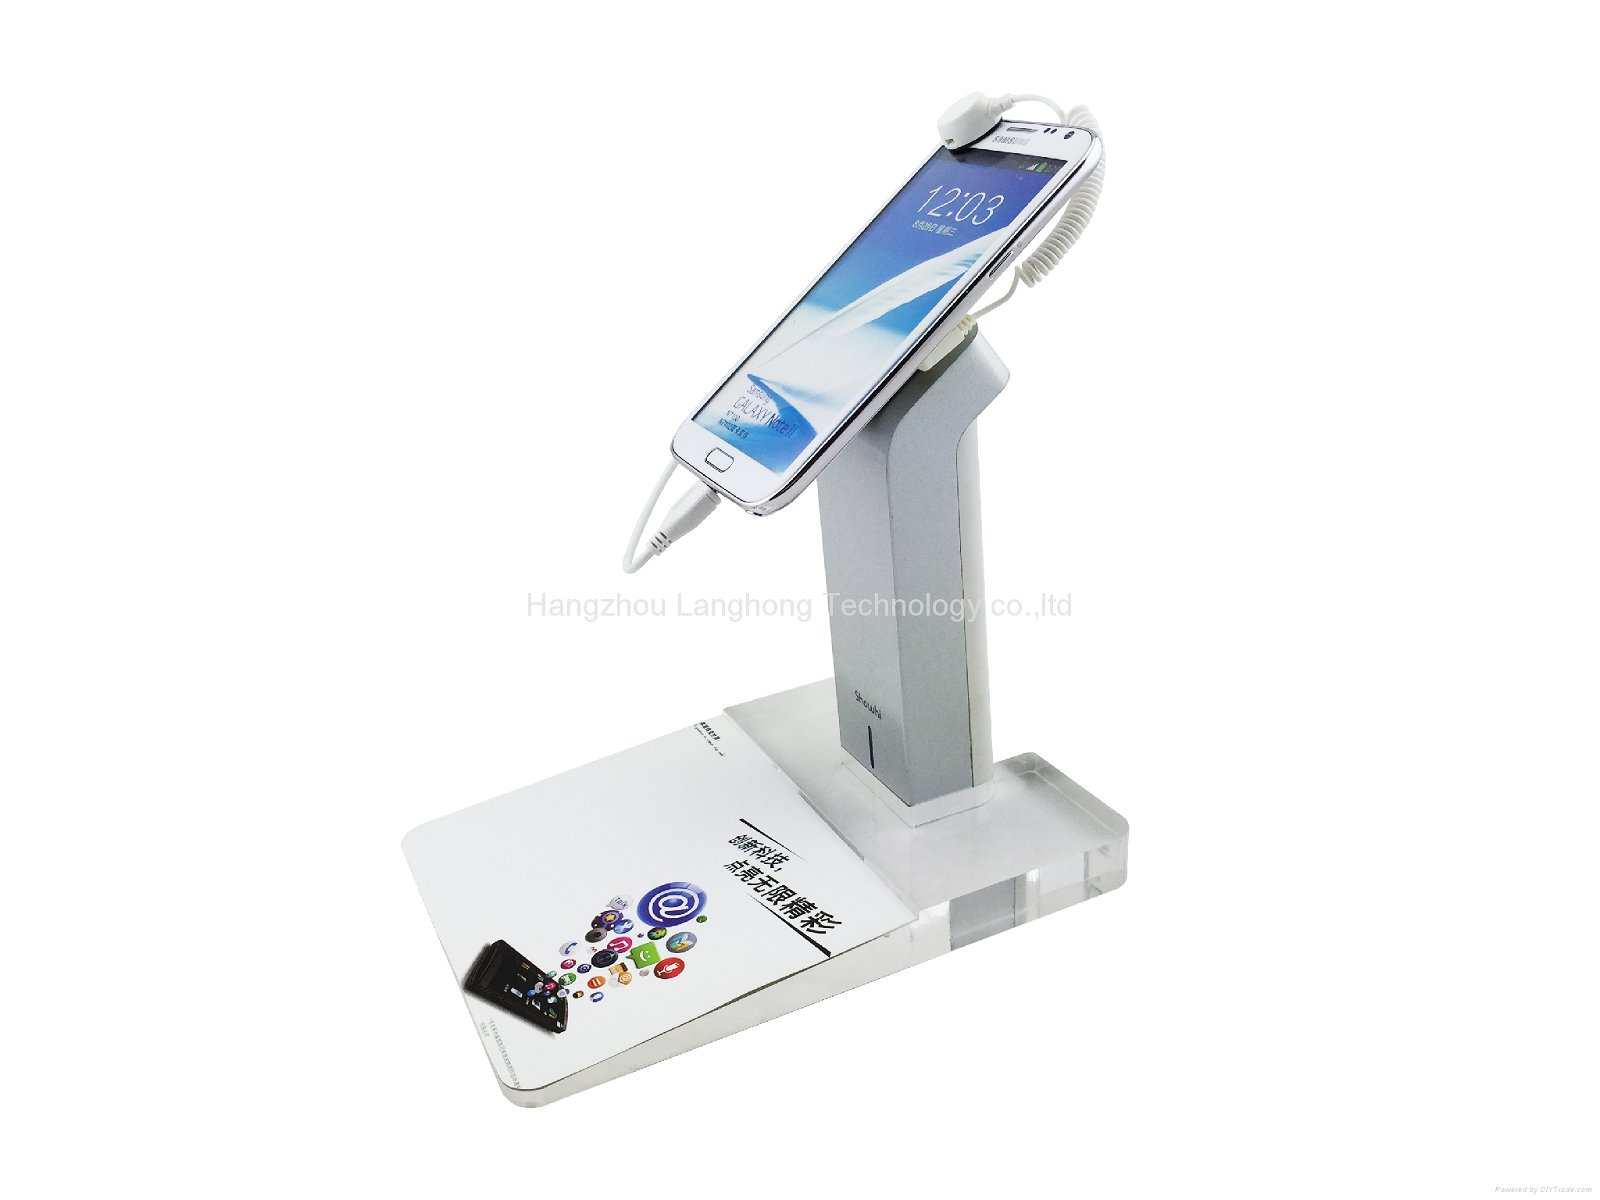 Showhi mobile phone security stand holder